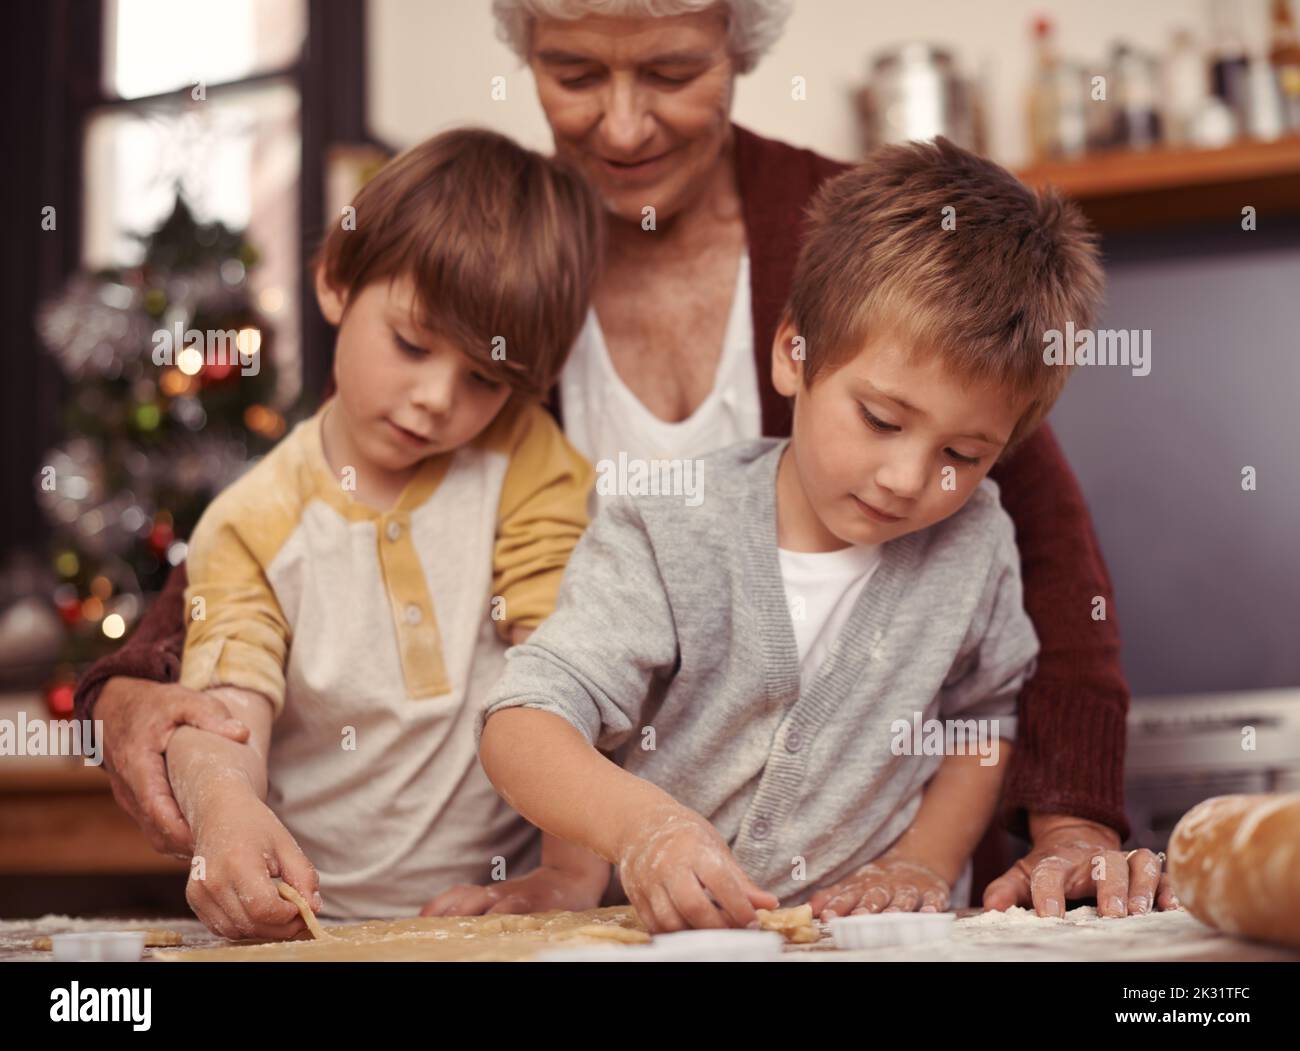 Messy but tasty. Two cute little boys baking with their grandmother in the kitchen. Stock Photo